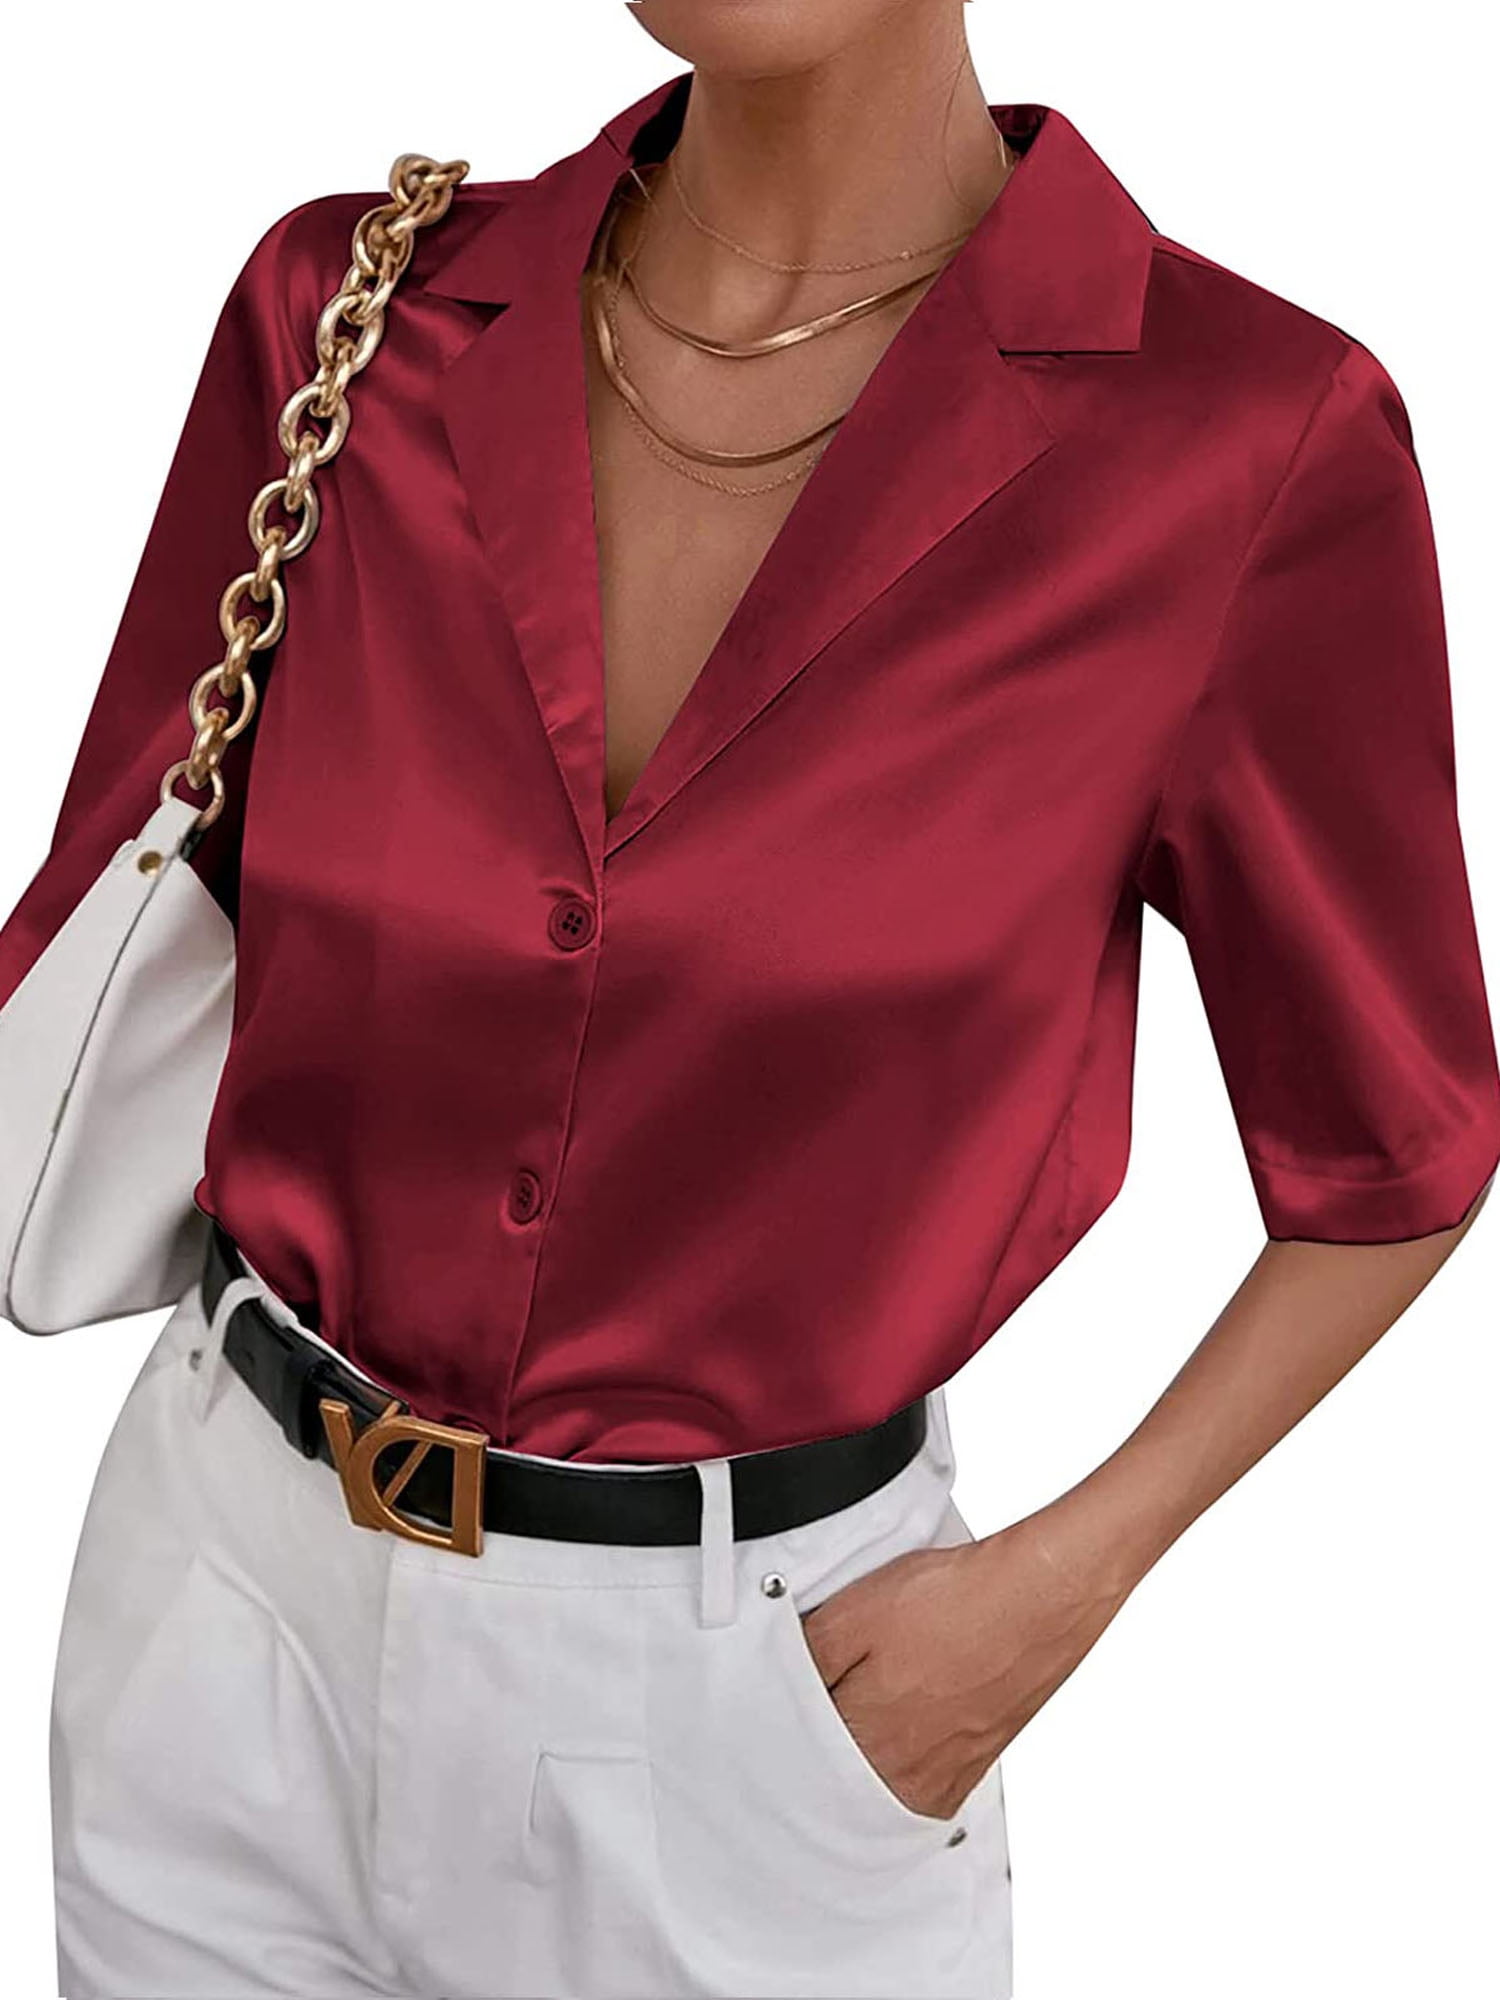 Elegant Women Embroidered Silk Satin Business Workwear Casual Tops Blouse Shirts